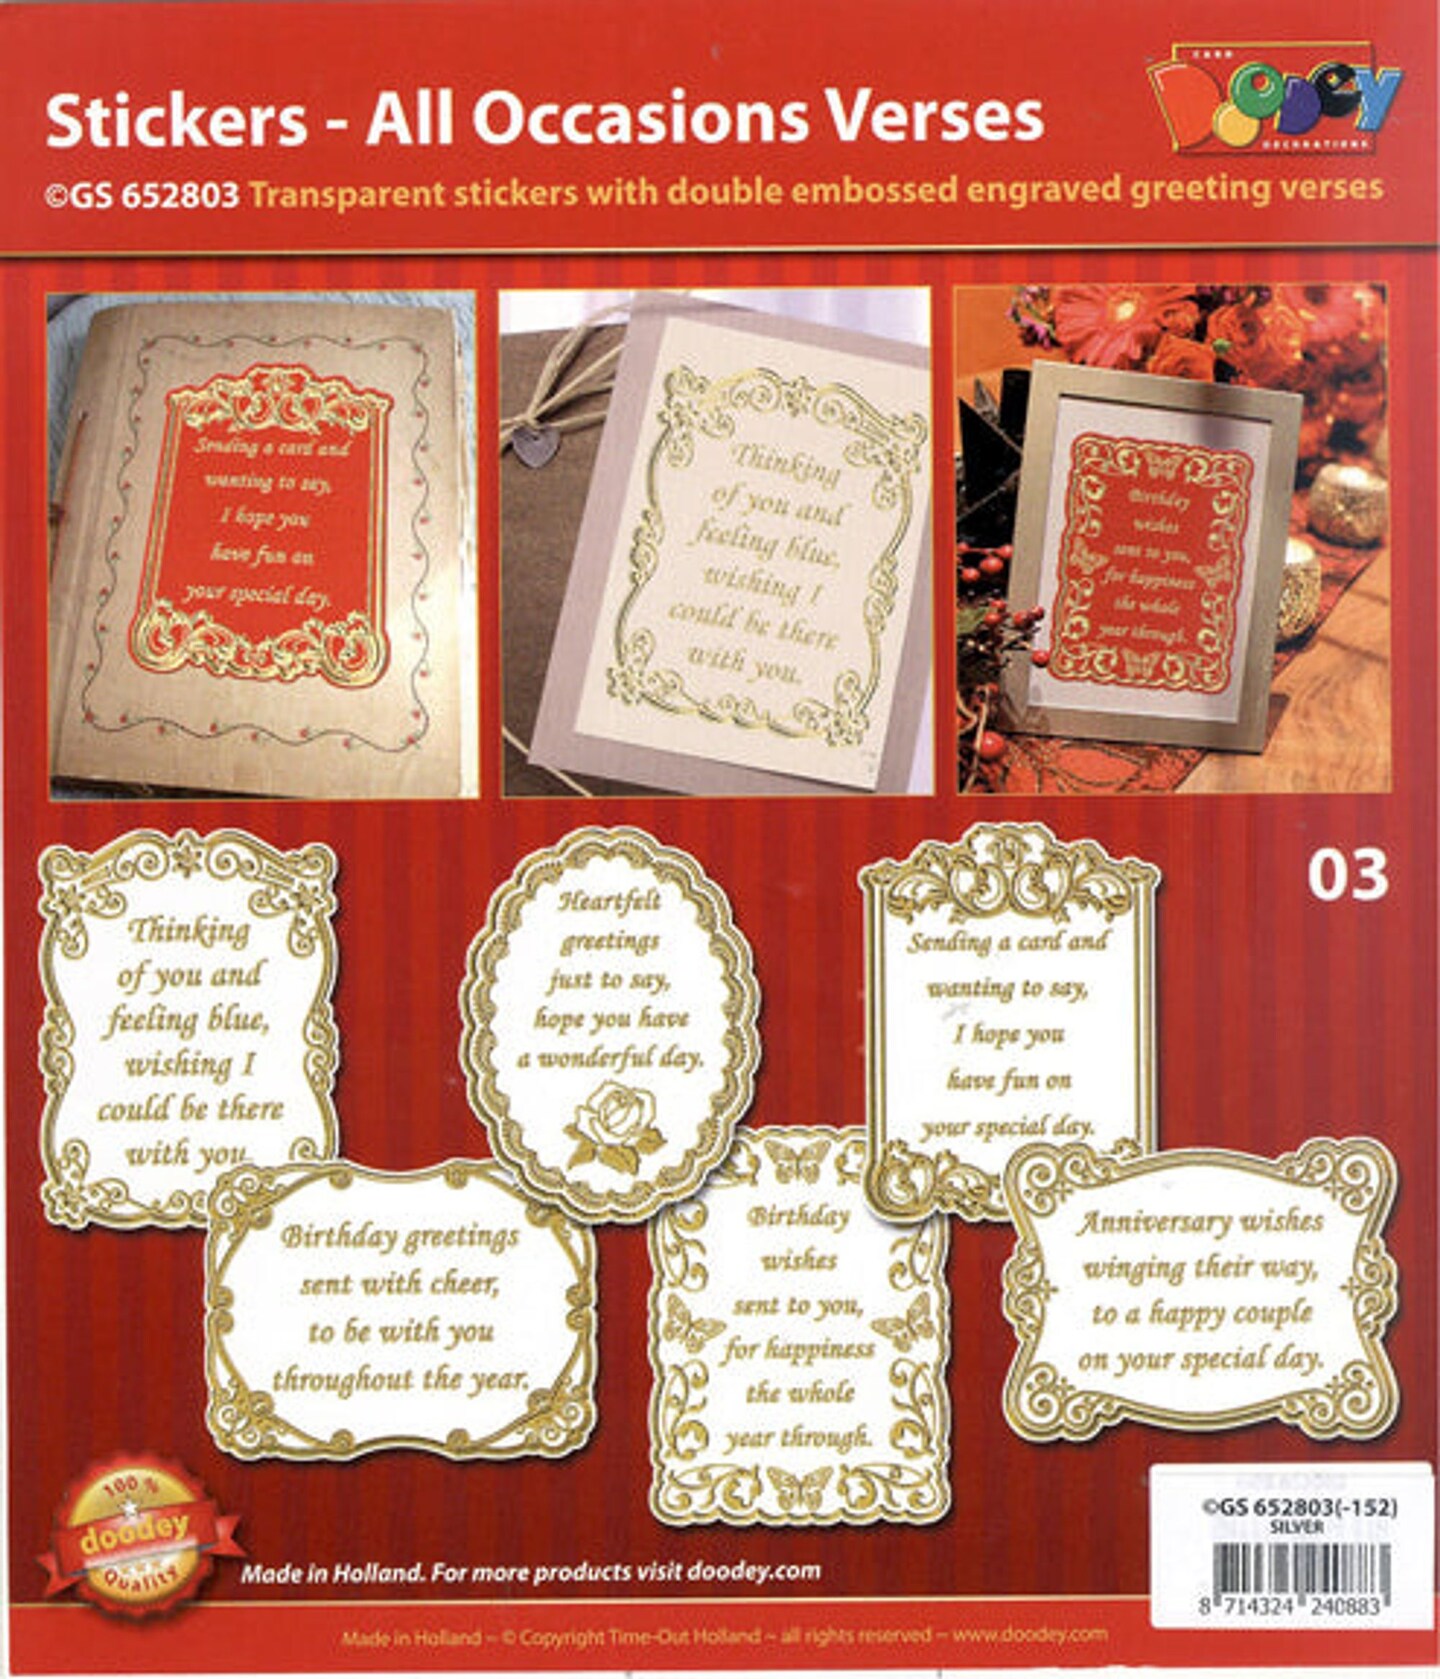 Doodey All Occasions Verses - Transparent Gold/Silver - Transparent Gold